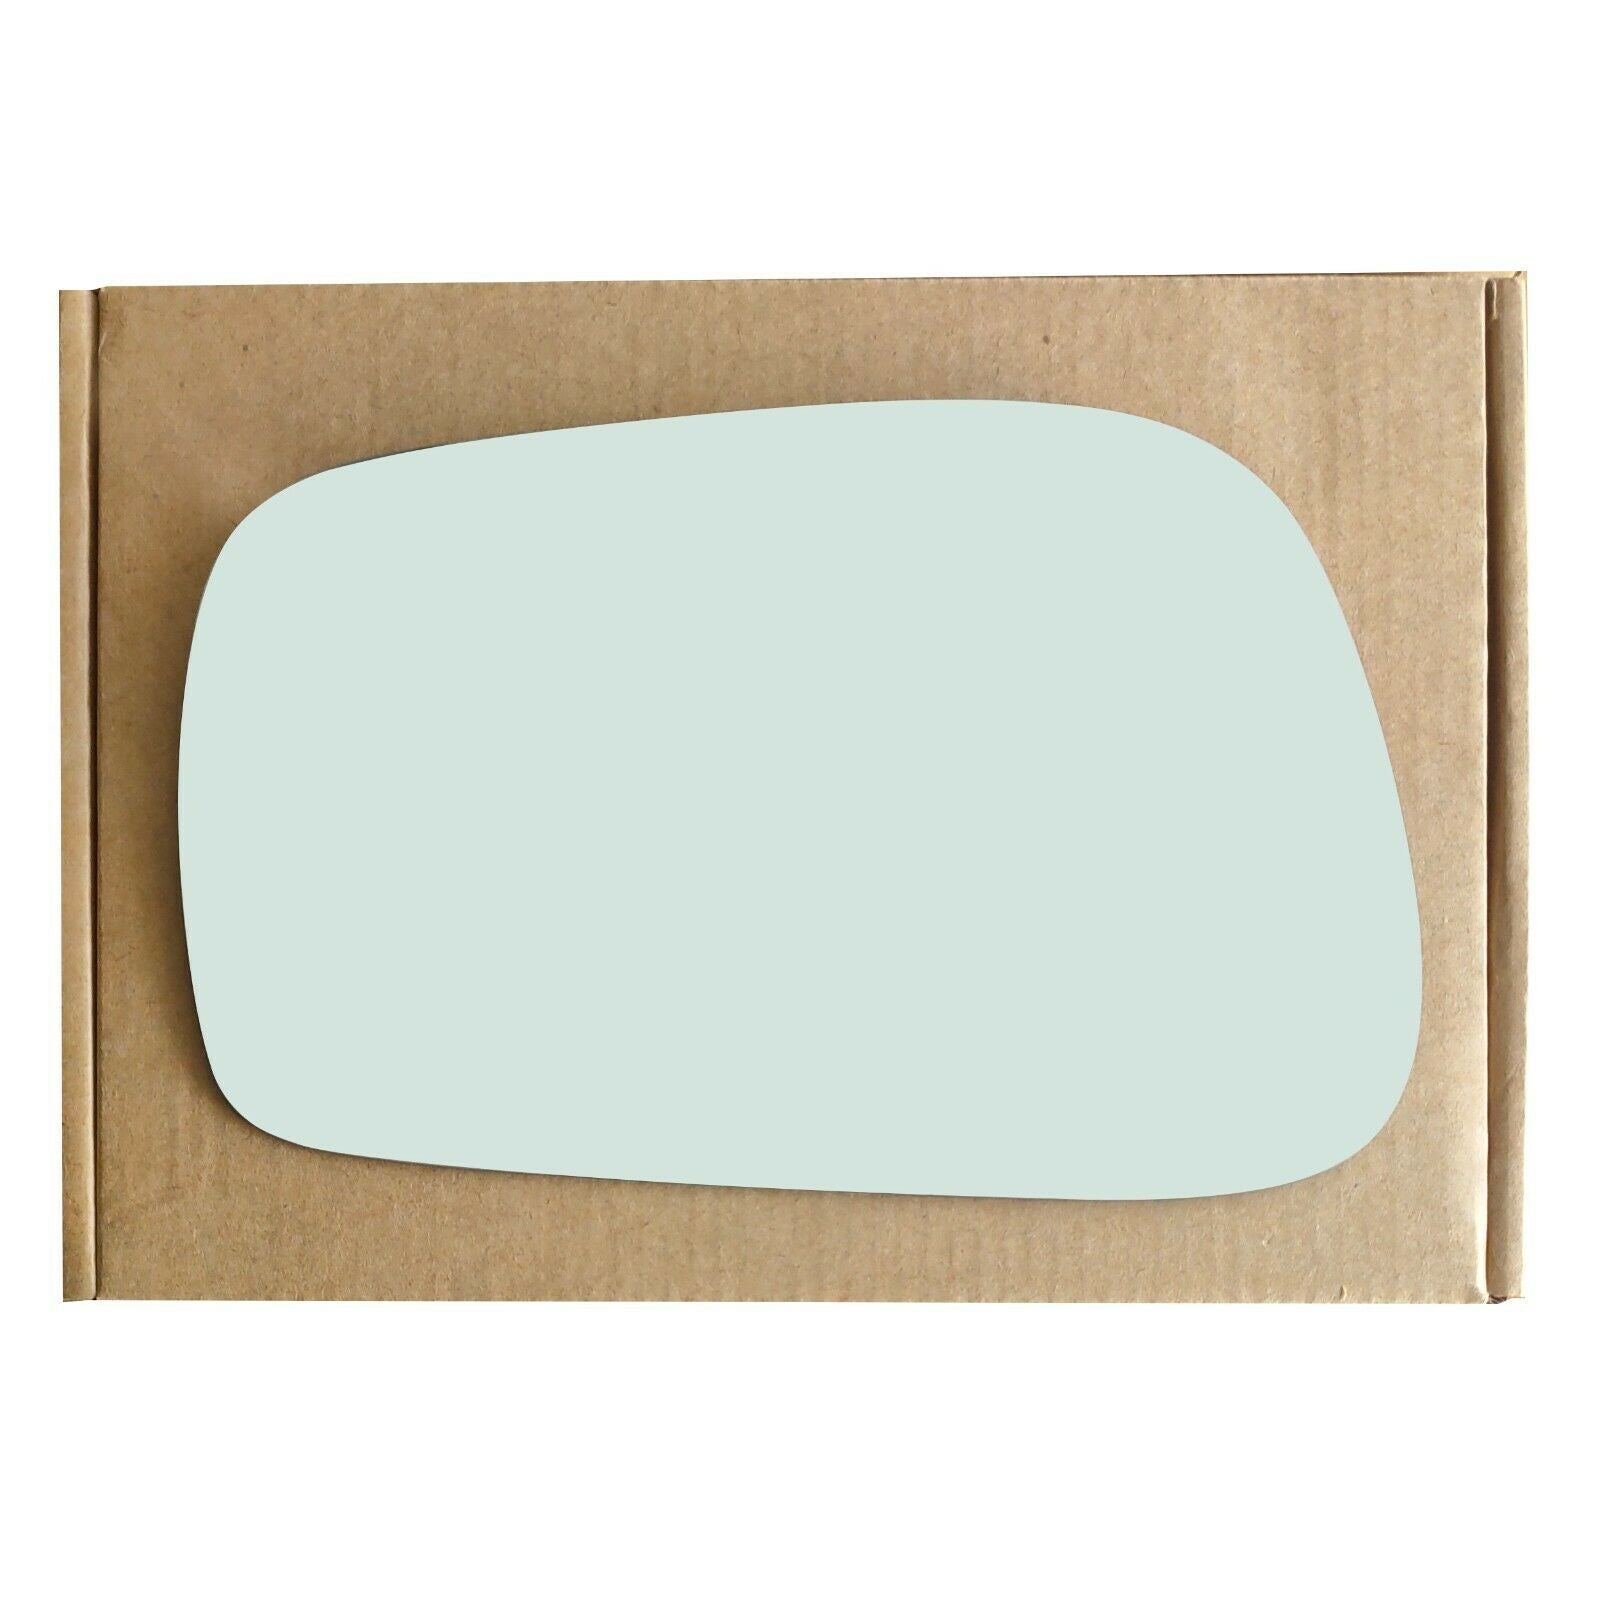 WLLW Replacement Mirror Glass for 2003-2008 Toyota Corolla/Toyota Matrix/Pontiac Vibe, Driver Left Side LH/Passenger Right Side RH/The Both Sides Flat Convex M-0052